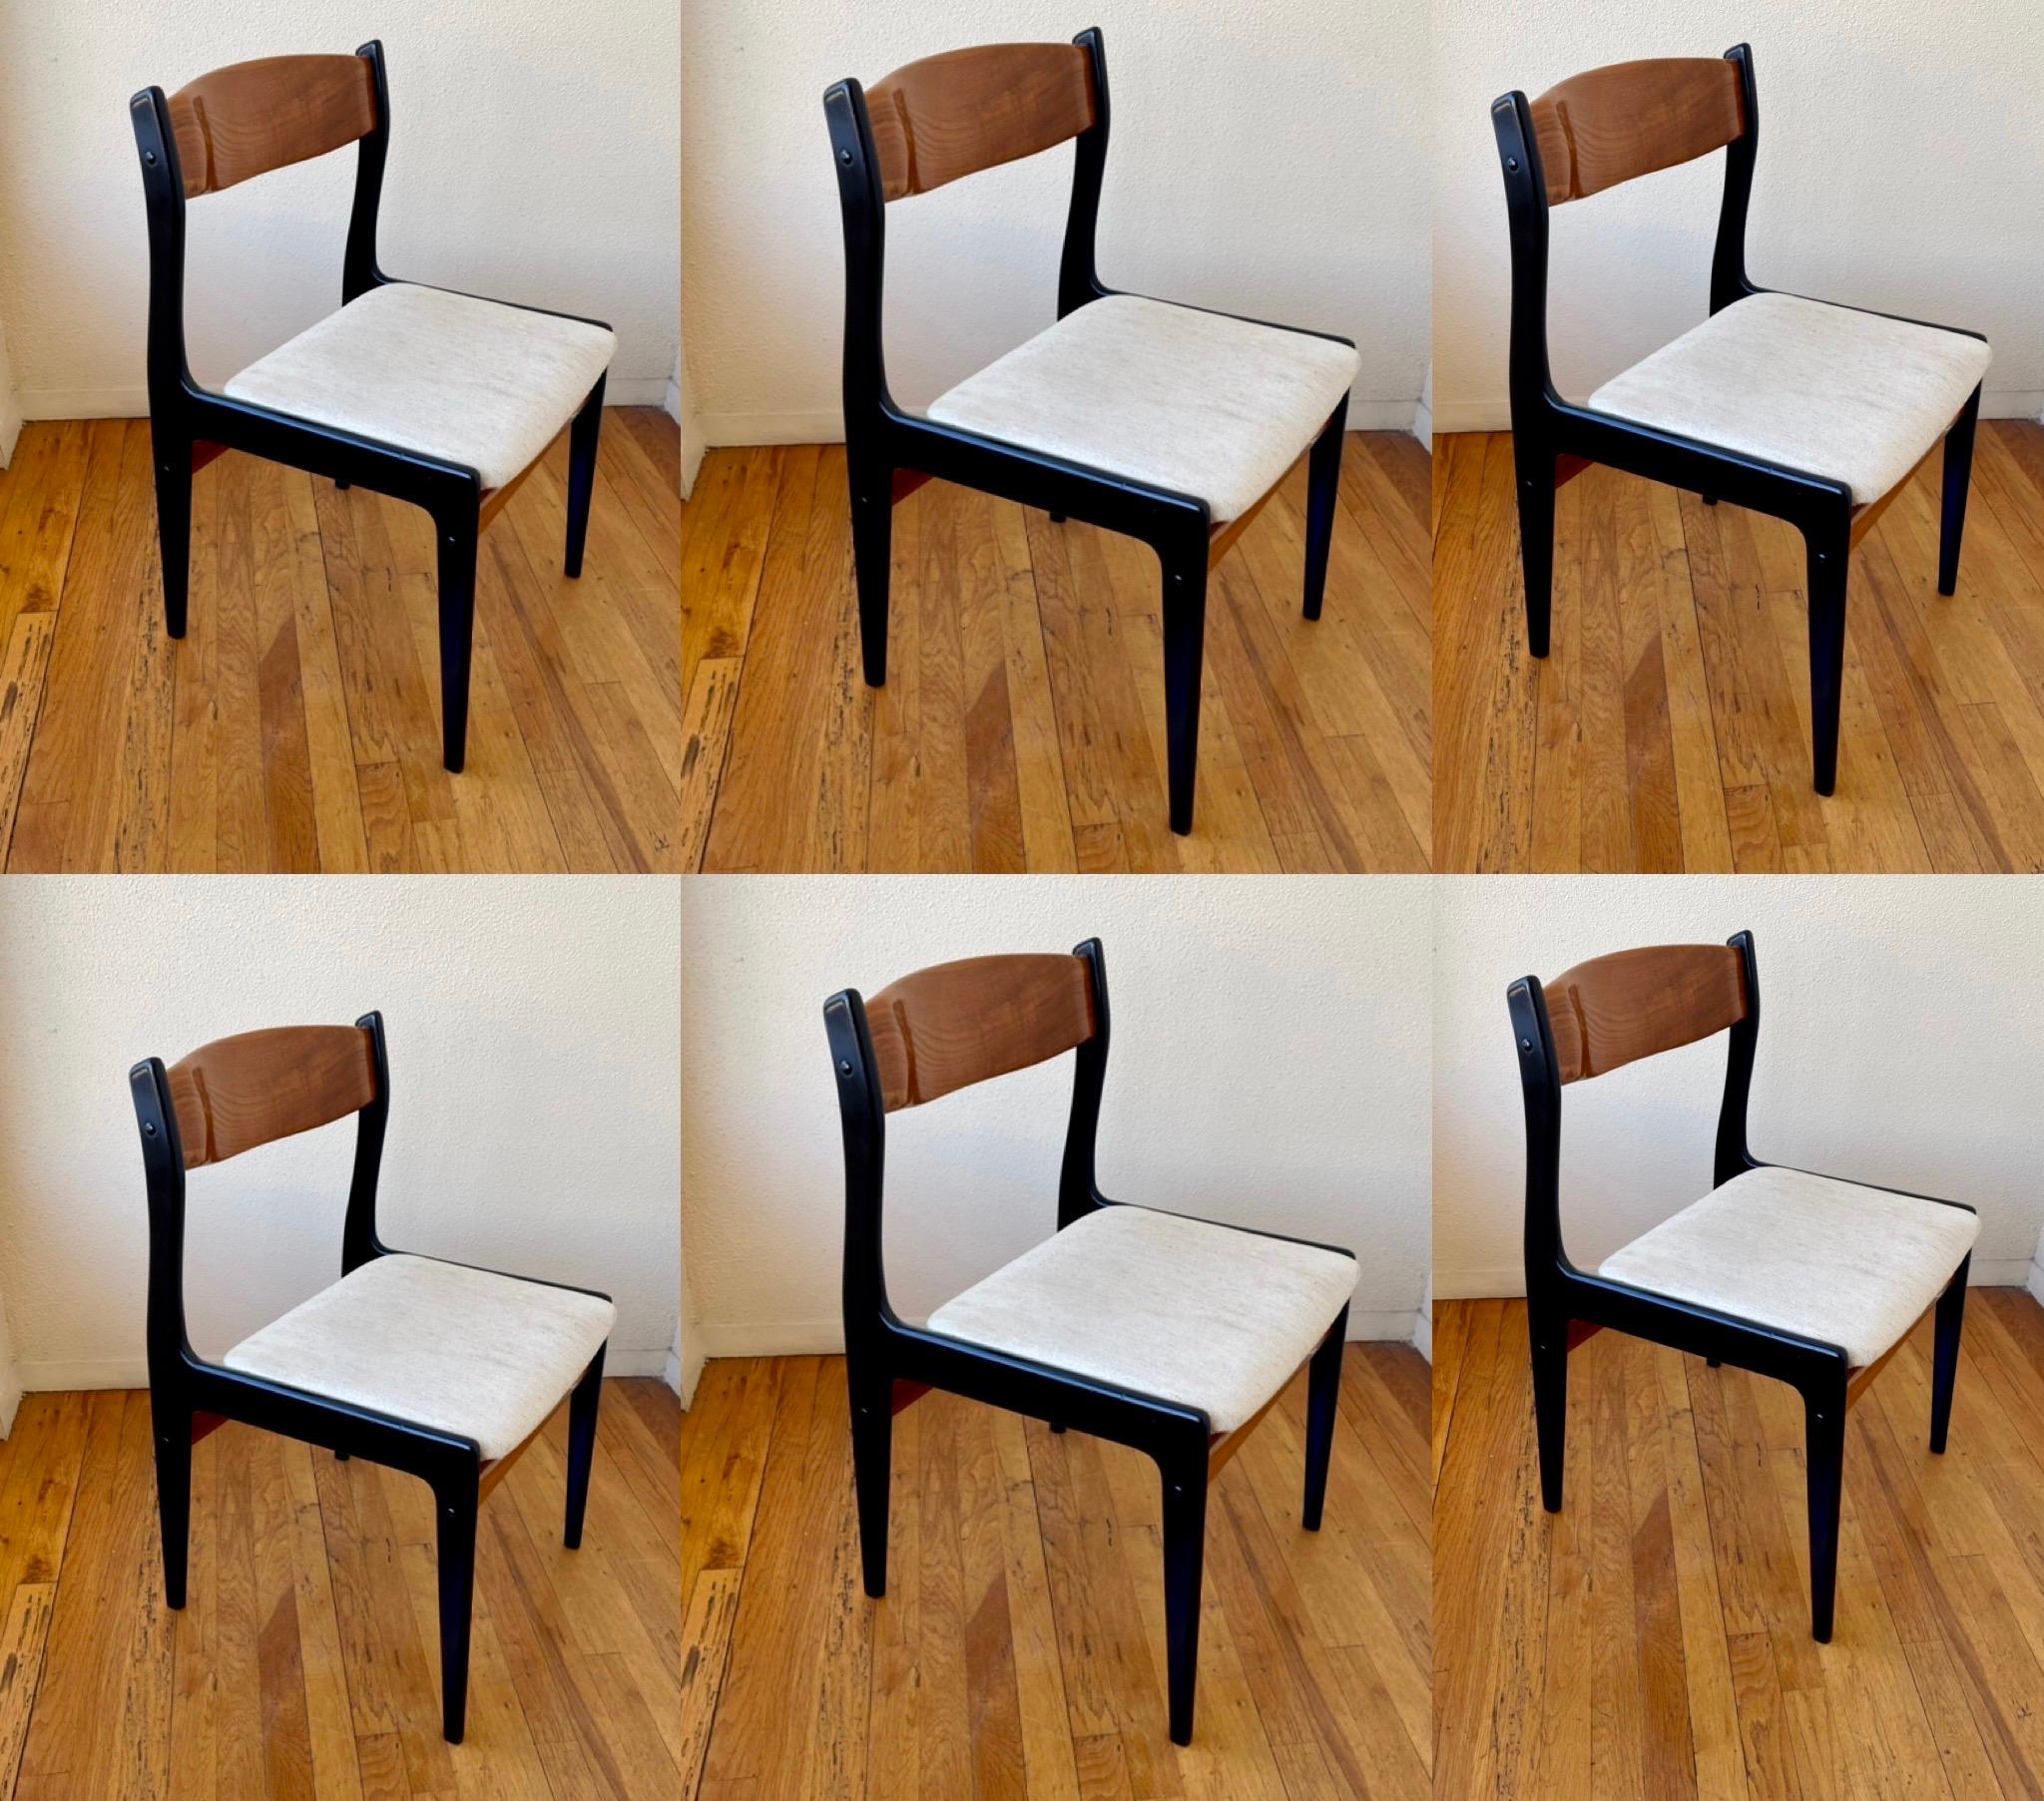 Great set of 8 Danish modern solid lacquer teak dining chairs circa 1960's, the chairs have been professionally lacquer and refinish the seat covers are ok, some show light stains easy to replace.